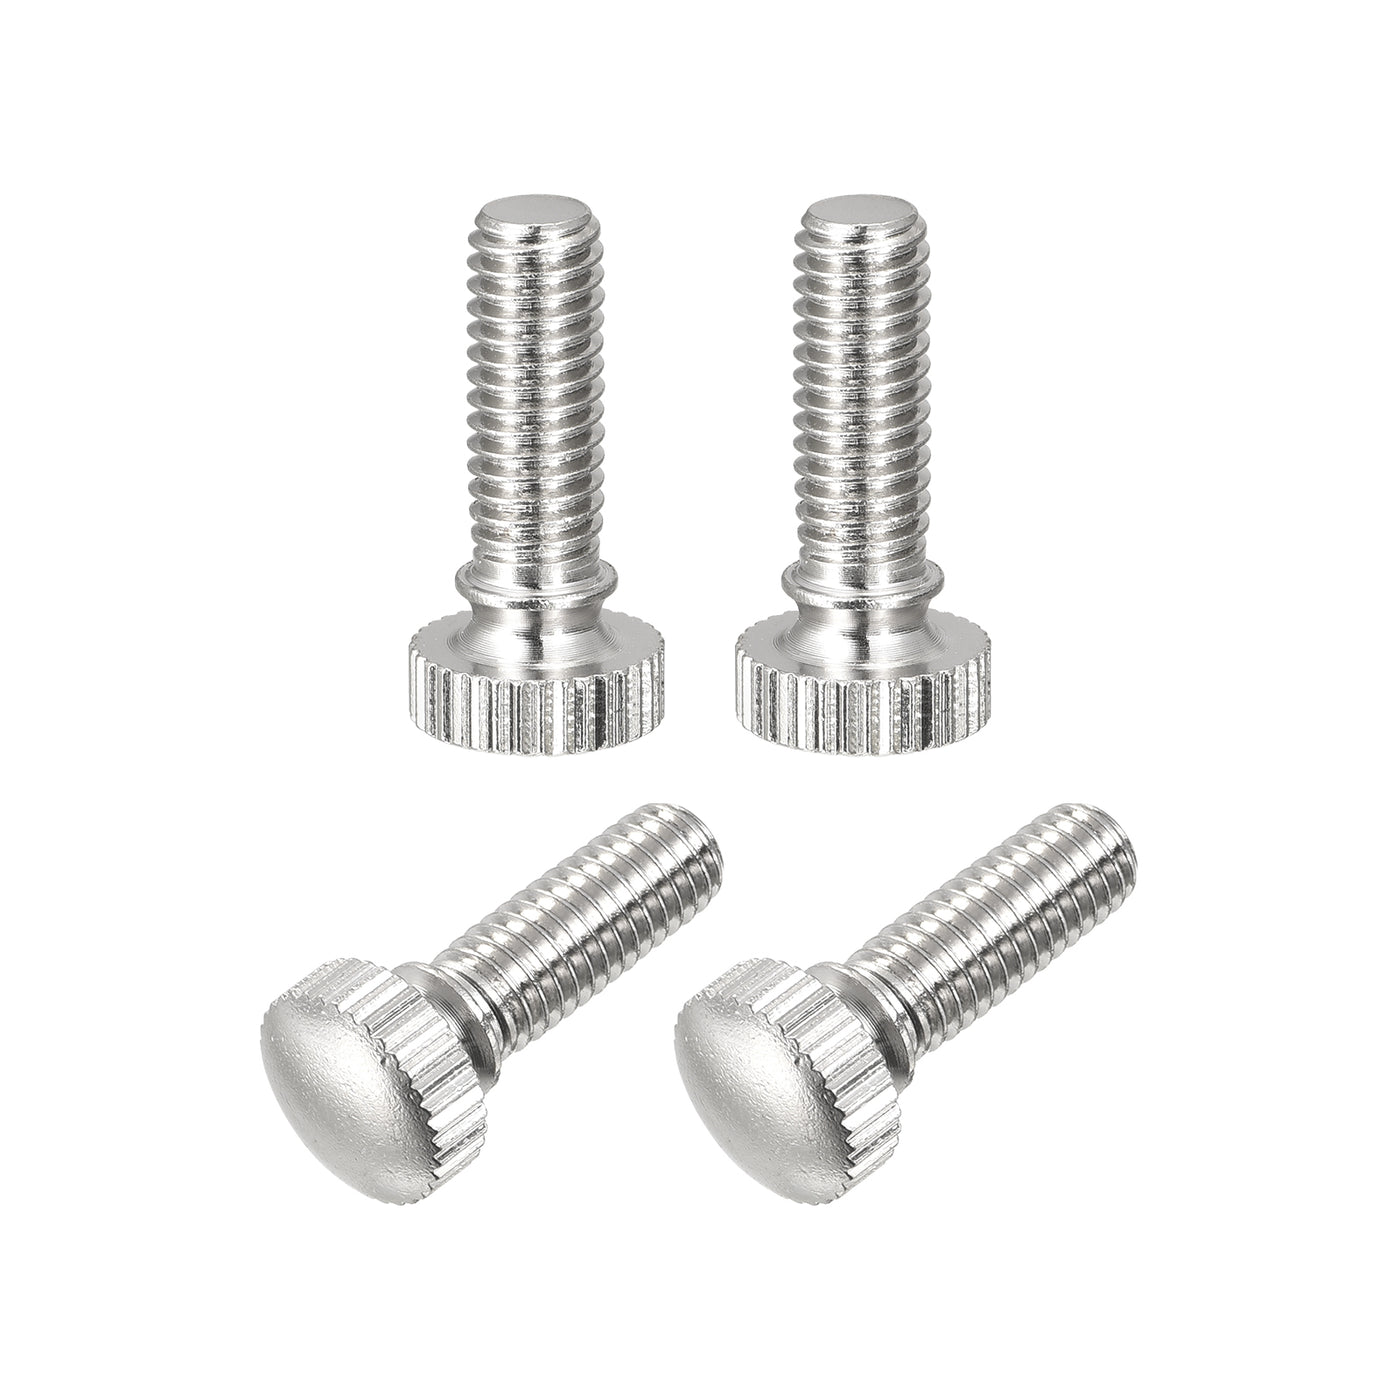 uxcell Uxcell Knurled Thumb Screws, M6x16mm Brass Shoulder Bolts Grip Knobs Fasteners, Nickel Plated 4Pcs